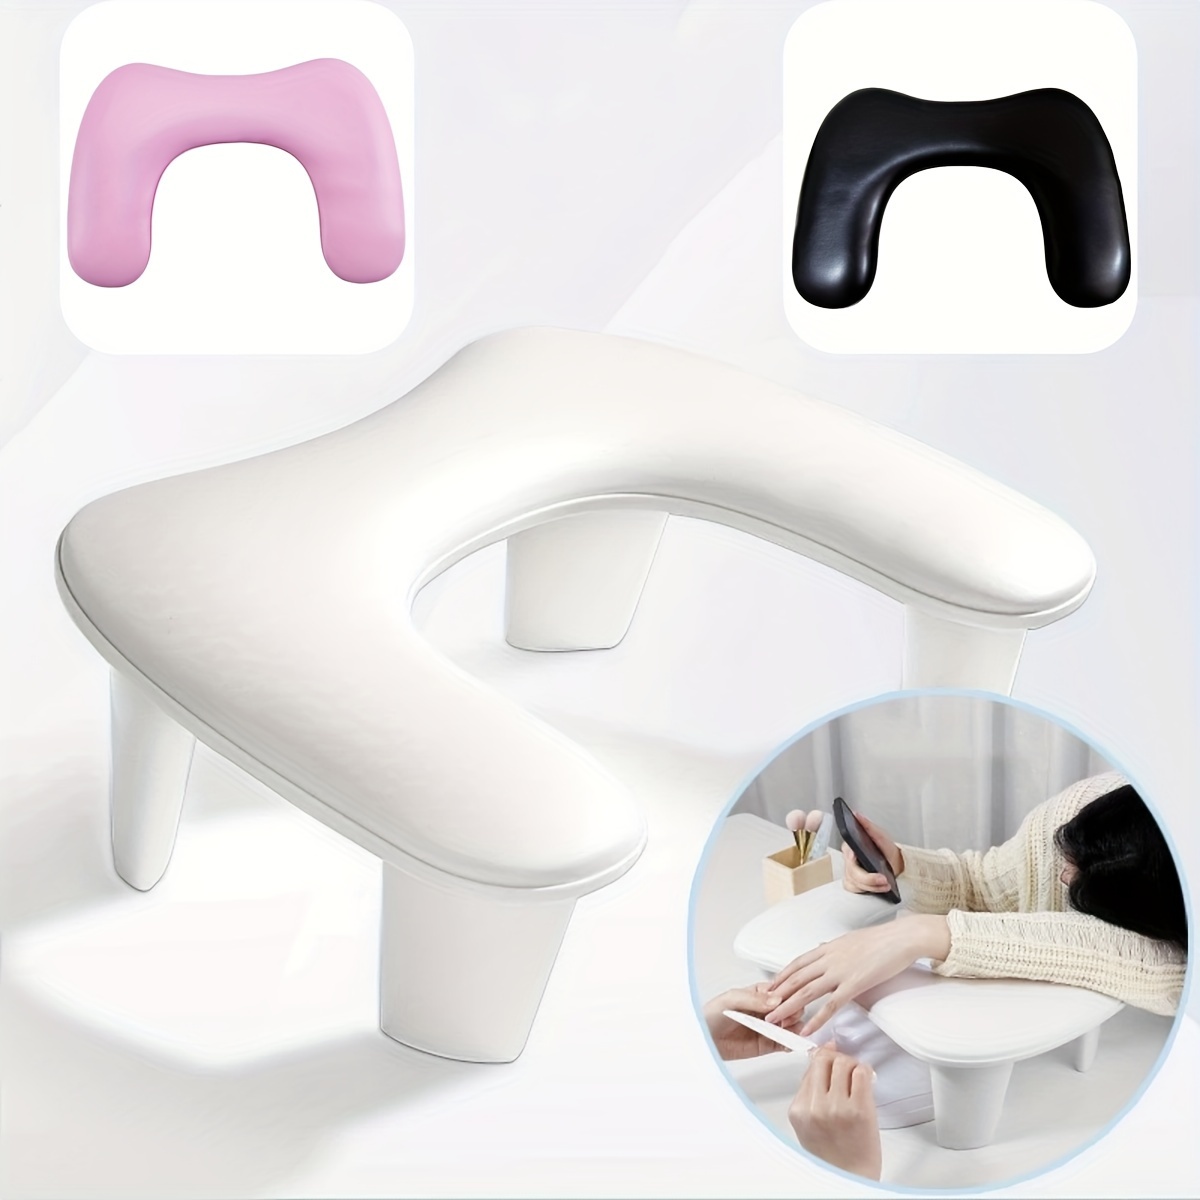 

Ergonomic Nail Art Hand Rest Pillow - Pink, Black, White - Removable U-shaped Resting Pad For Comfort - No Fragrance